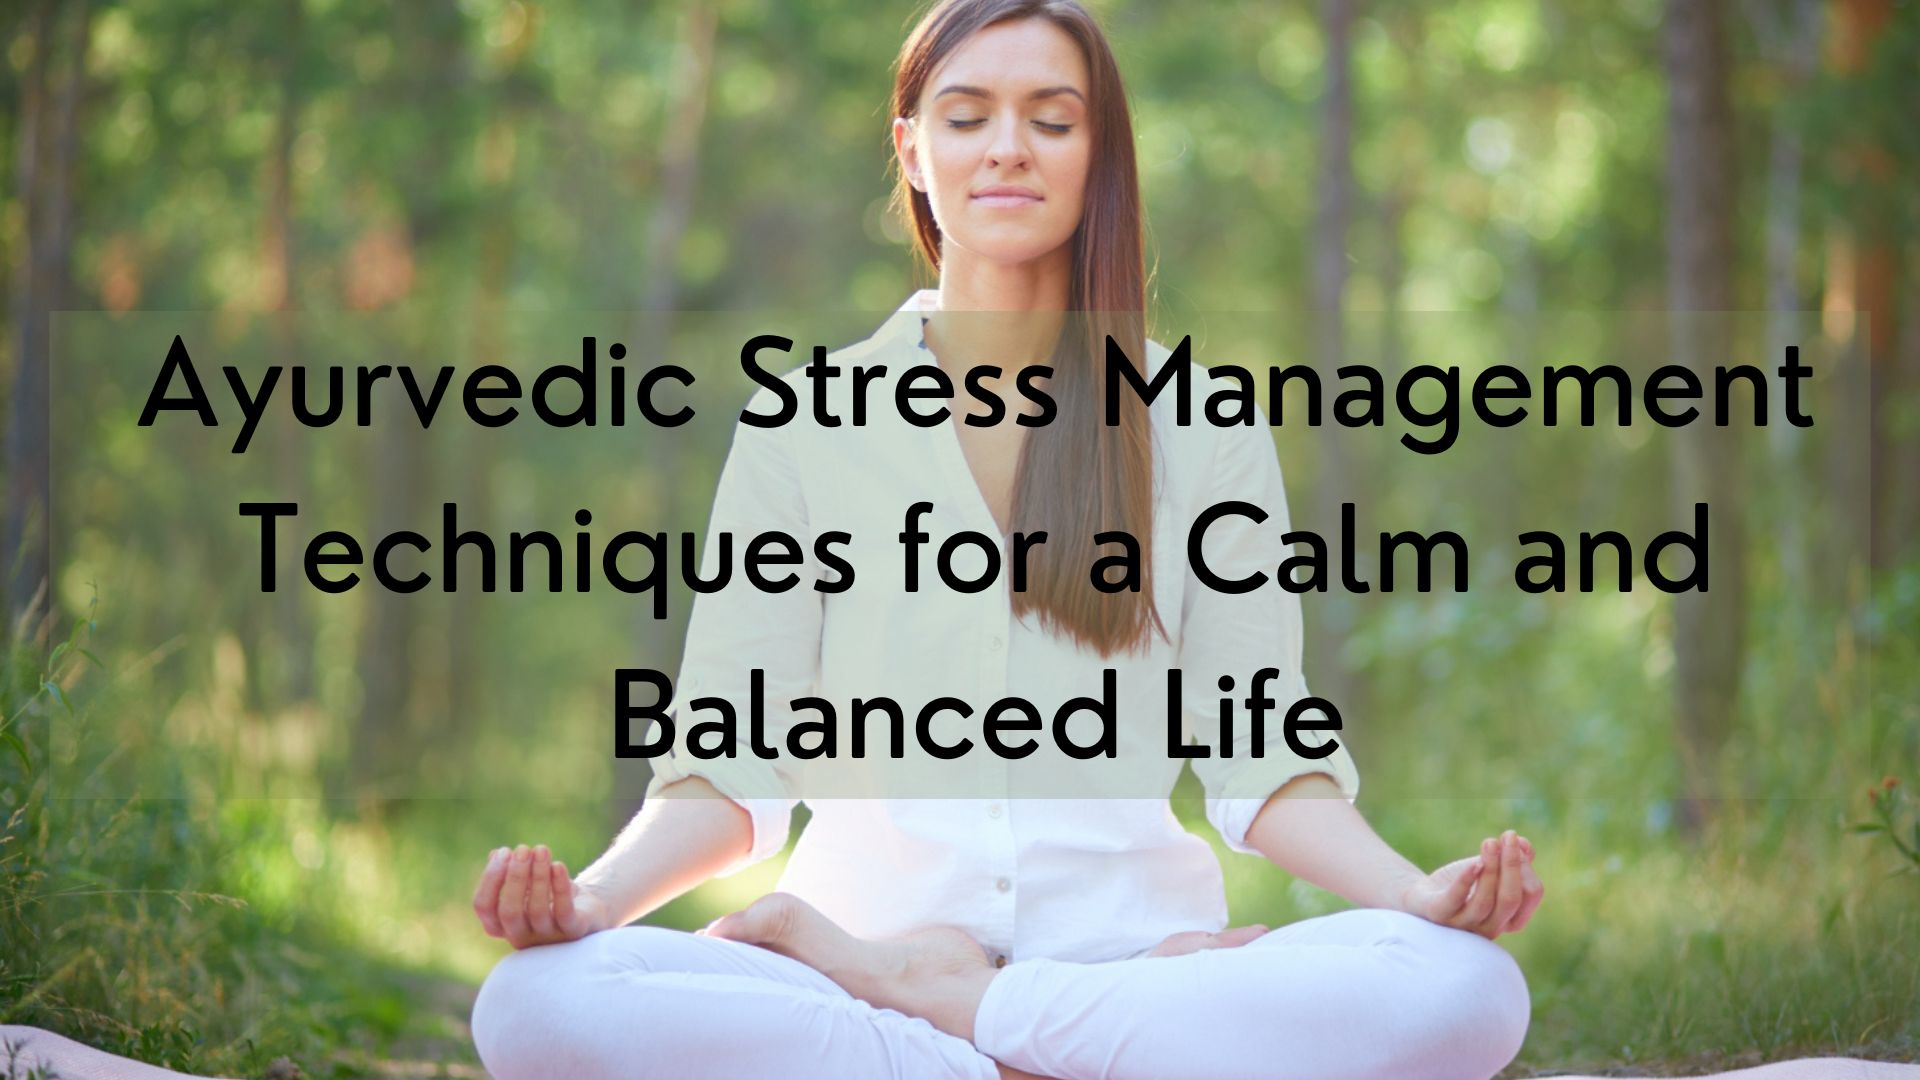 Ayurvedic Approach to Stress Management and Mental Health